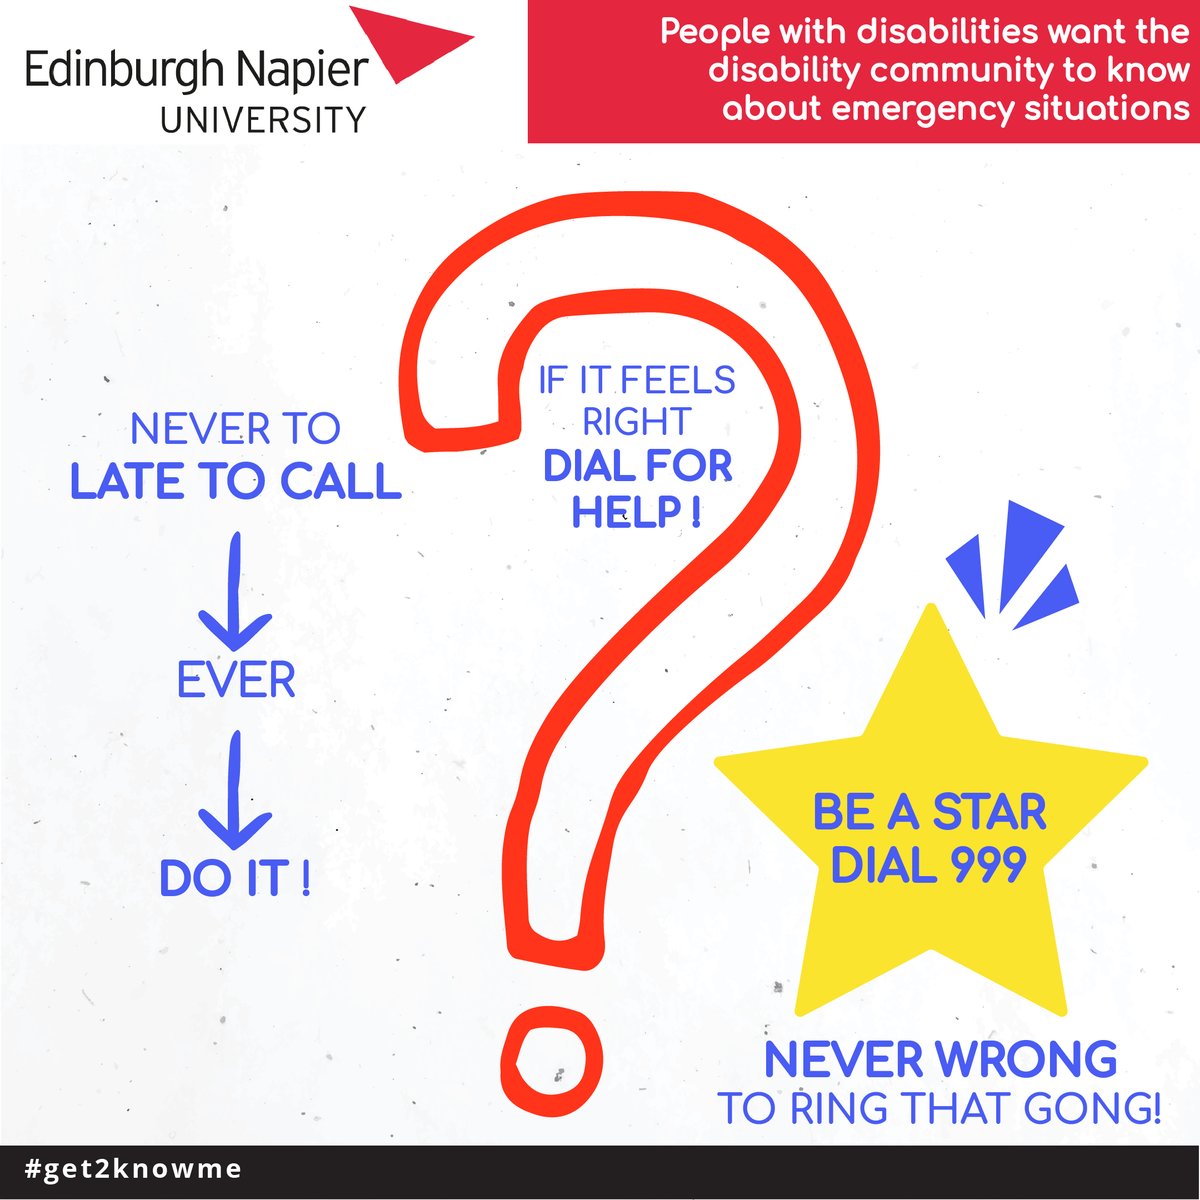 Remember! It's never too late to call for help. It it feels right, dial for help! Be a star, dial 999 🌟 Never wrong to ring that gong! #get2knowme #scotLDweek24